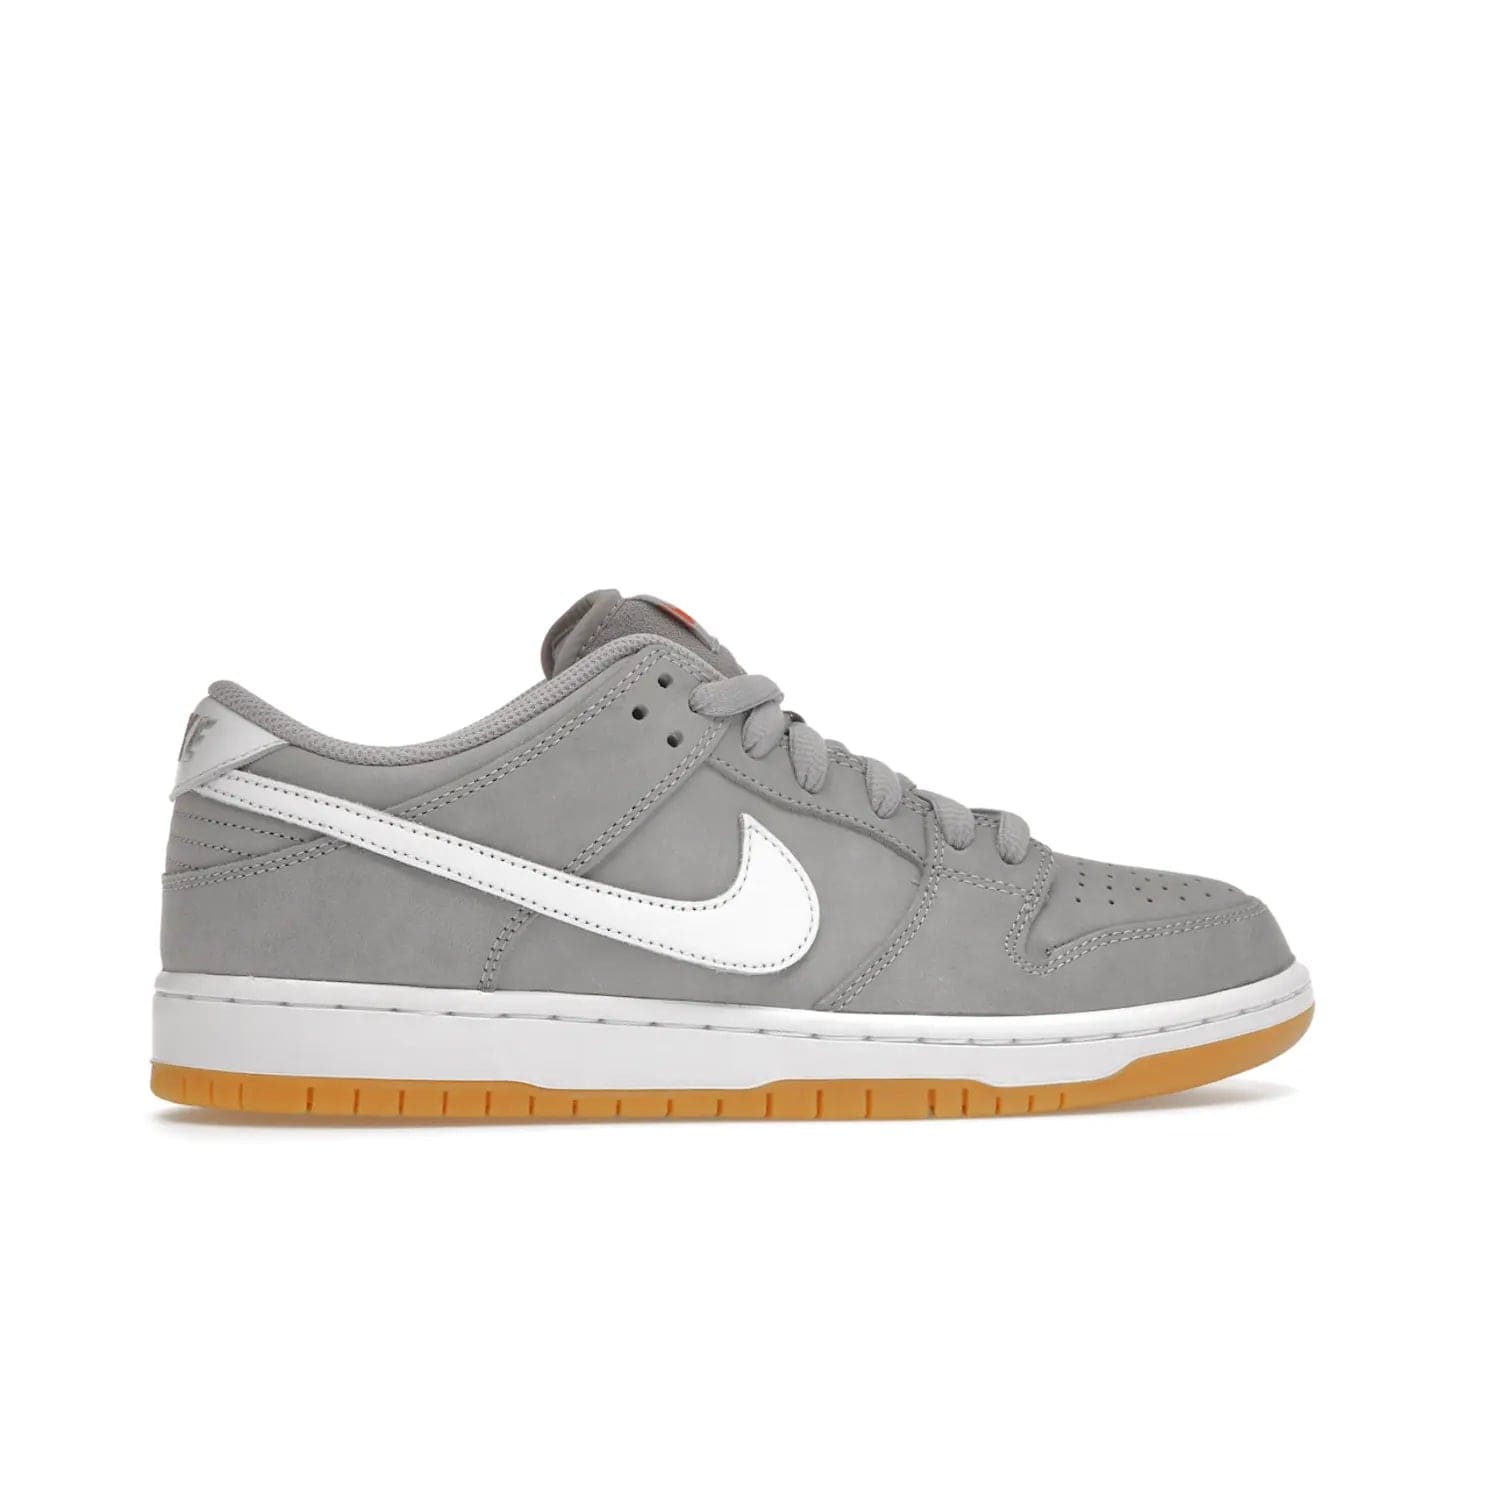 Nike SB Dunk Low Pro ISO Orange Label Wolf Grey Gum - Image 36 - Only at www.BallersClubKickz.com - Introducing Nike's SB Dunk Low Pro ISO Orange Label Wolf Grey Gum - a stylish shoe with a premium Wolf Grey upper, white leather Nike Swoosh, and an eye-catching gum outsole. With special Nike branding and packaging, this shoe adds a unique fashion statement. Out Feb. 24, 2023.